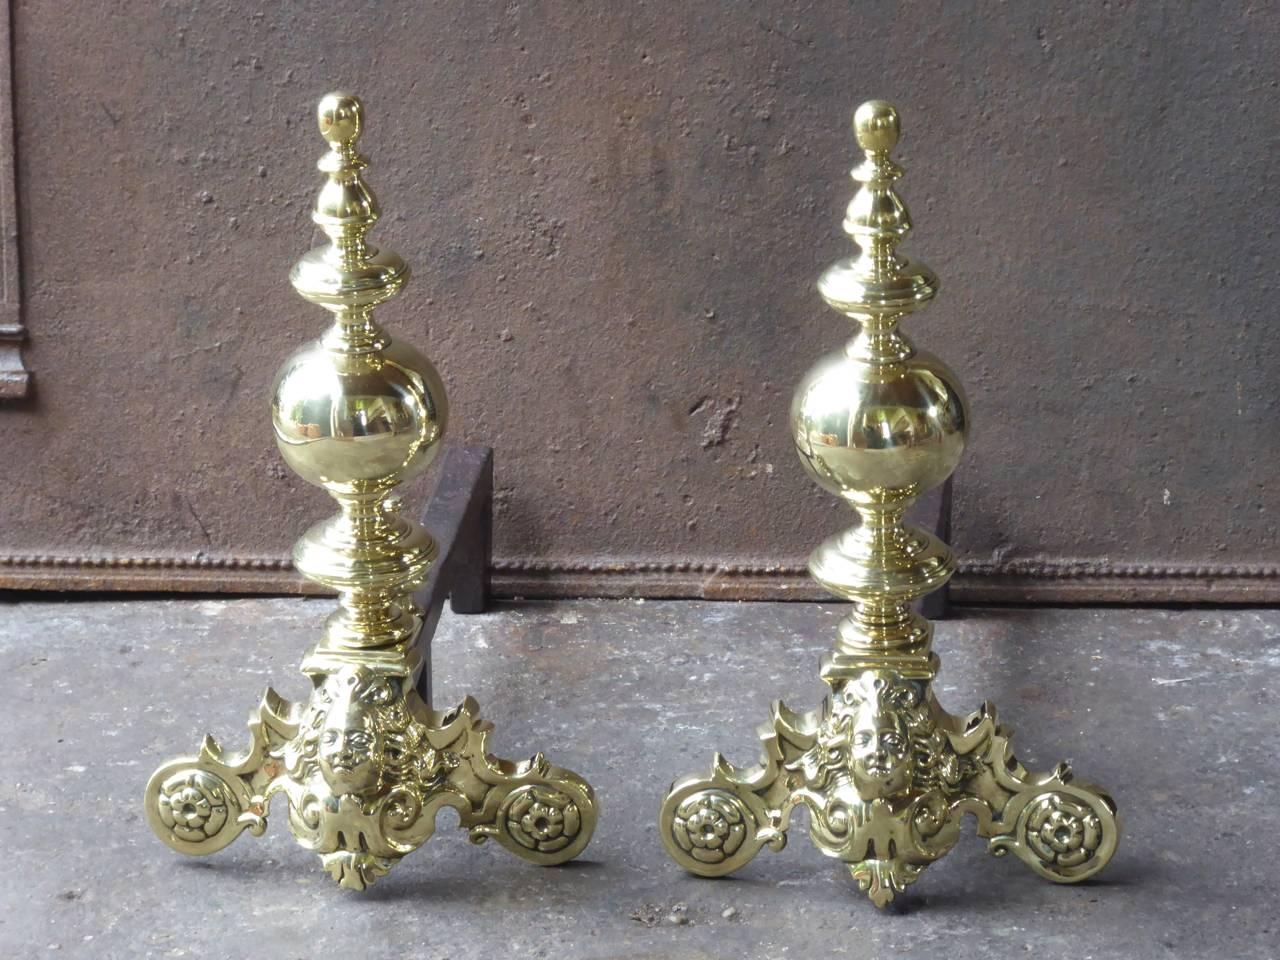 19th century Louis XIV style fire dogs made of polished brass and wrought iron.